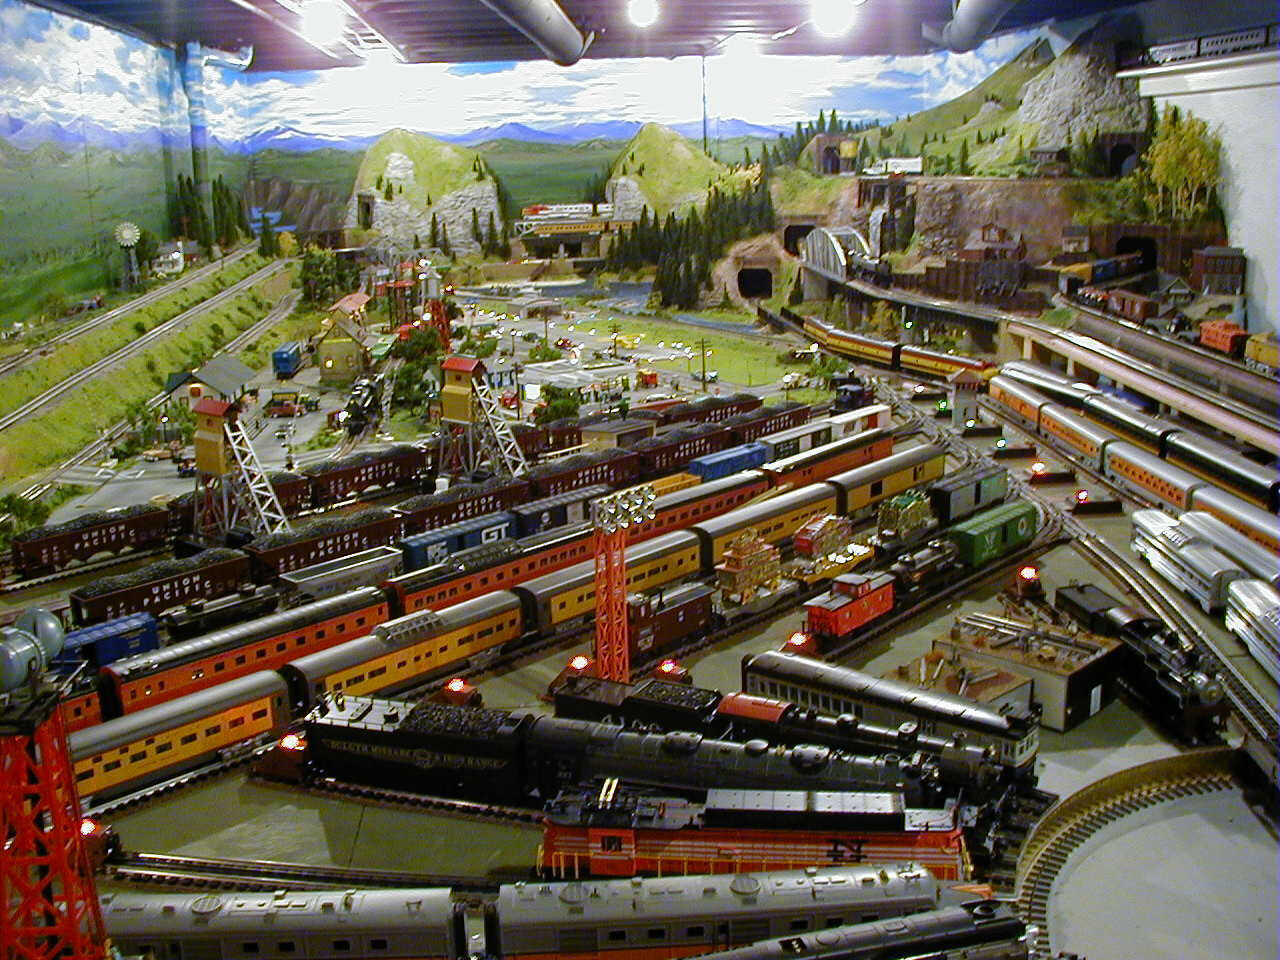 Look at all of the various trains on this awesome HO train layout. The 